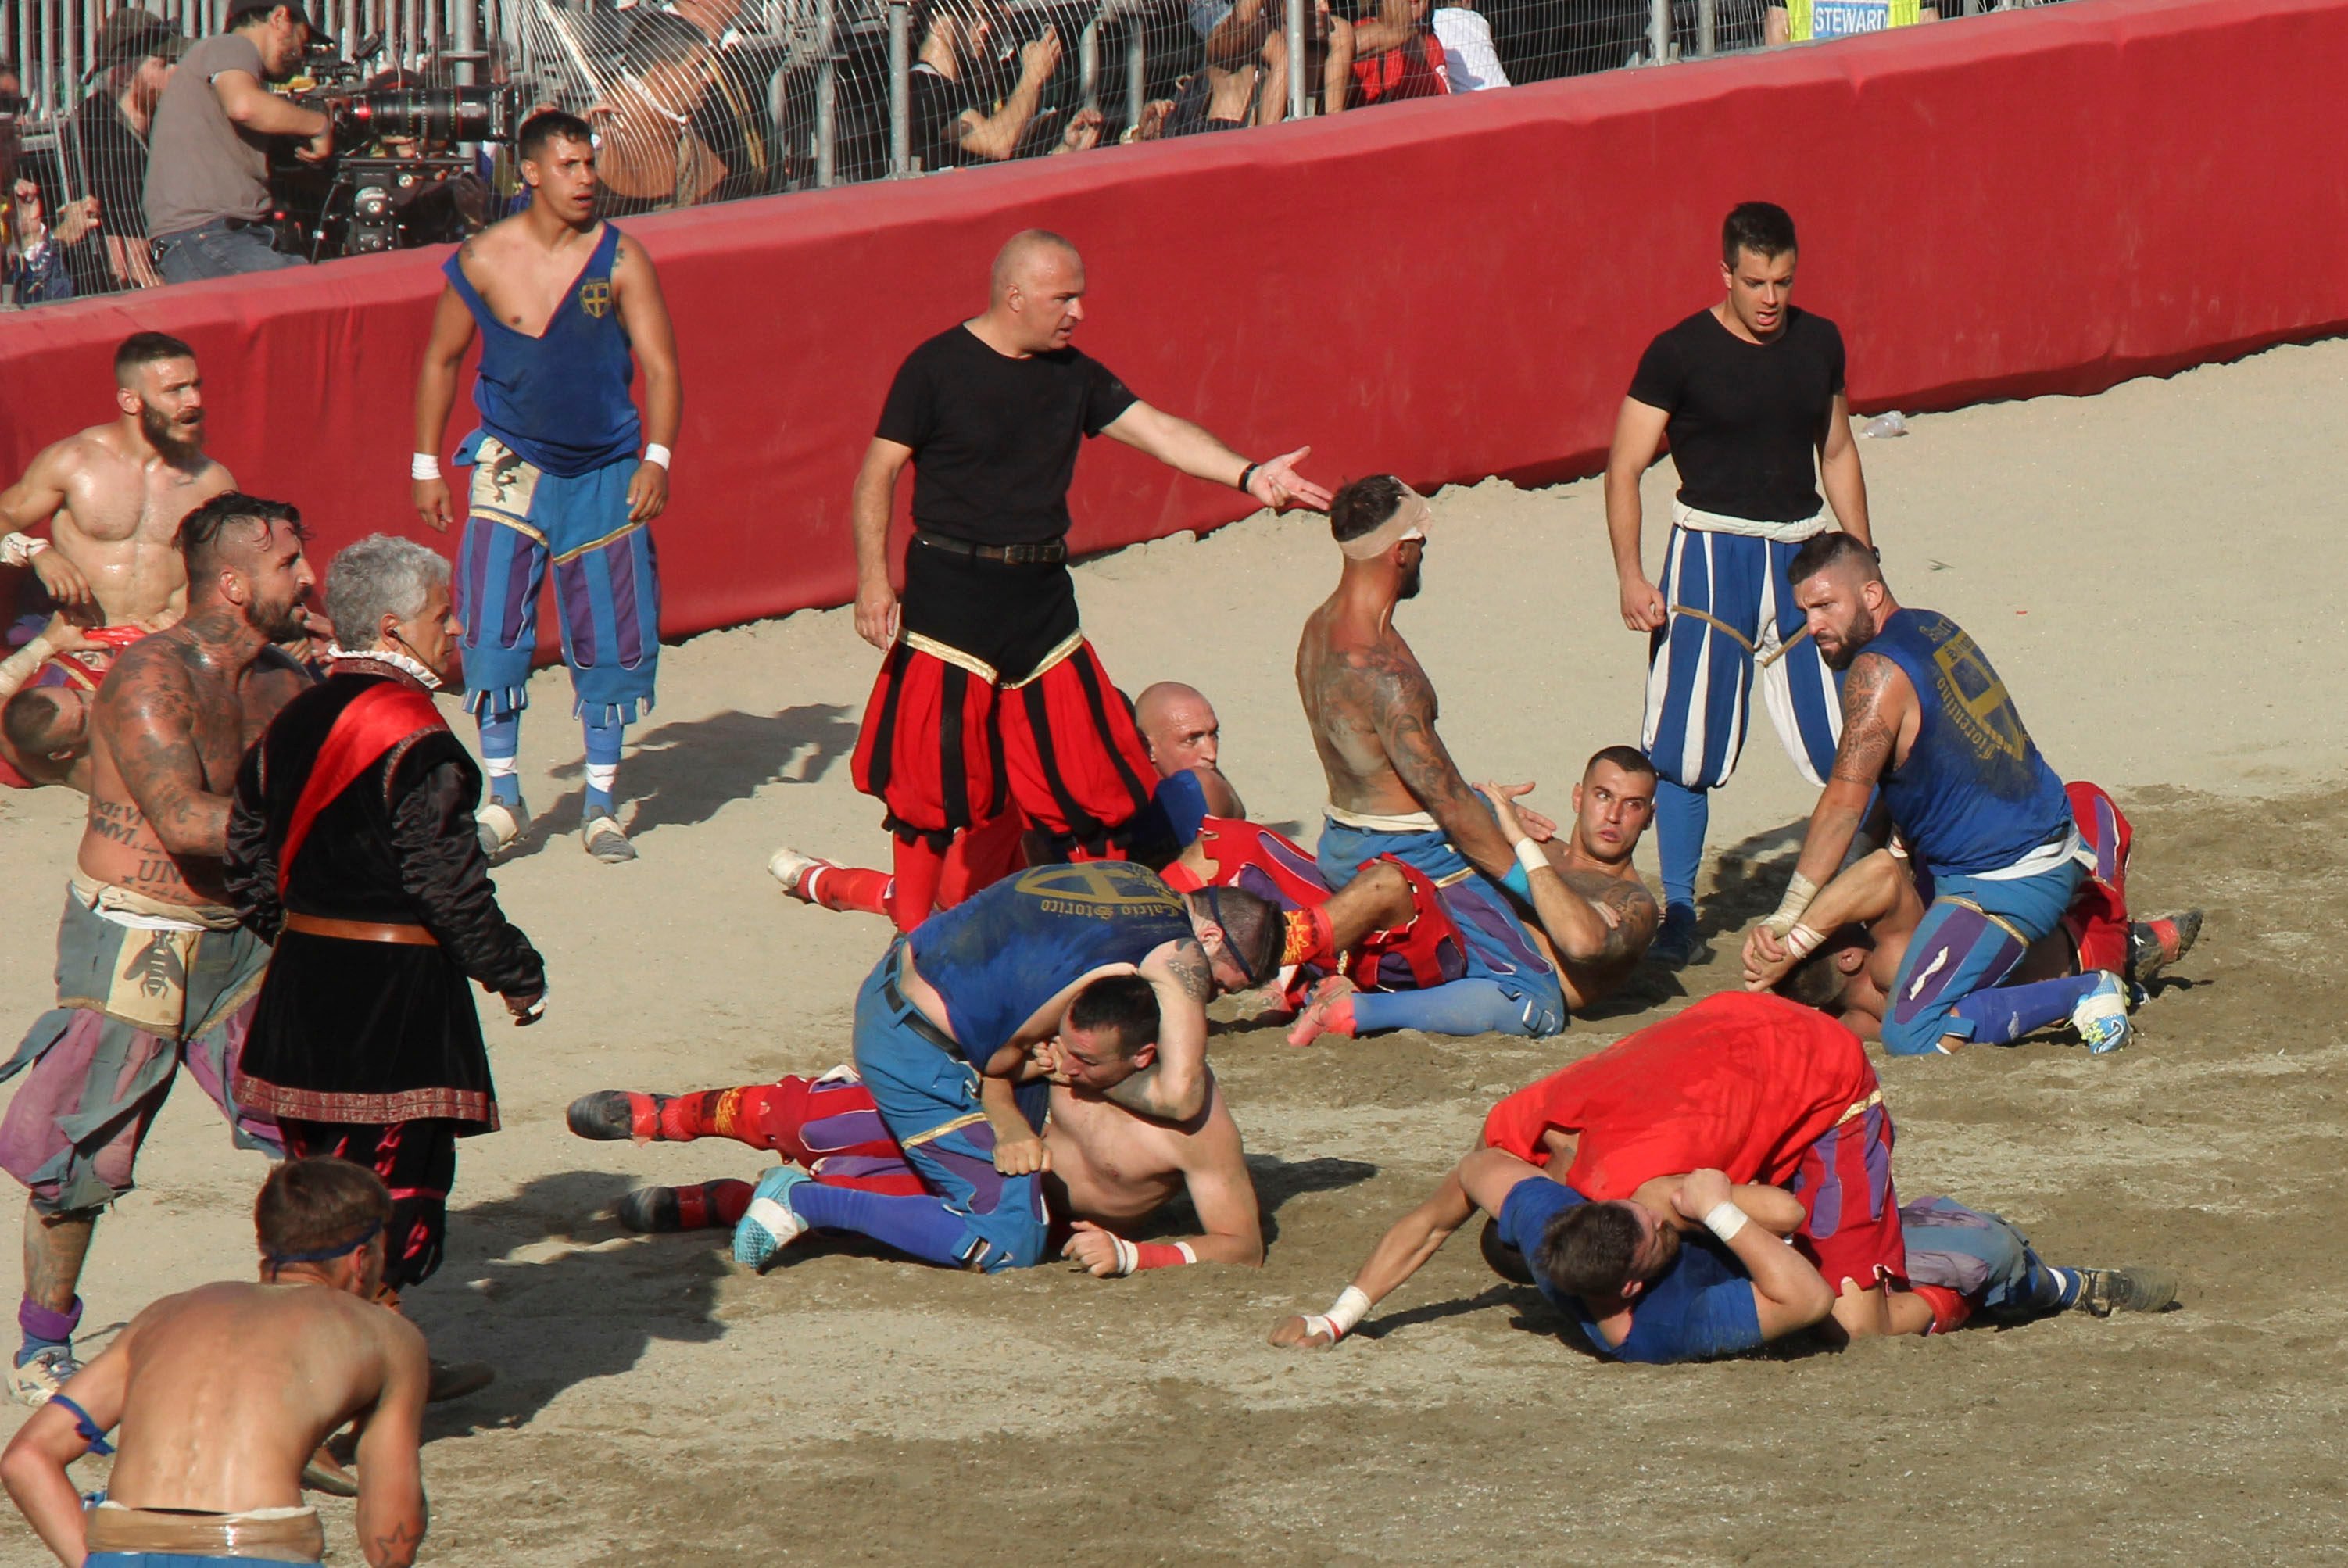 The Rossi of Santa Maria Novella (in red) take on Santa Croce’s Azzuri (in blue) watched by referees (in black) in the 2023 Calcio Storico Fiorentino, in Florence, Italy, Combining the sports of football, rugby, wrestling and street fighting, the event is one of the world’s most violent sports. Photo: John Brunton